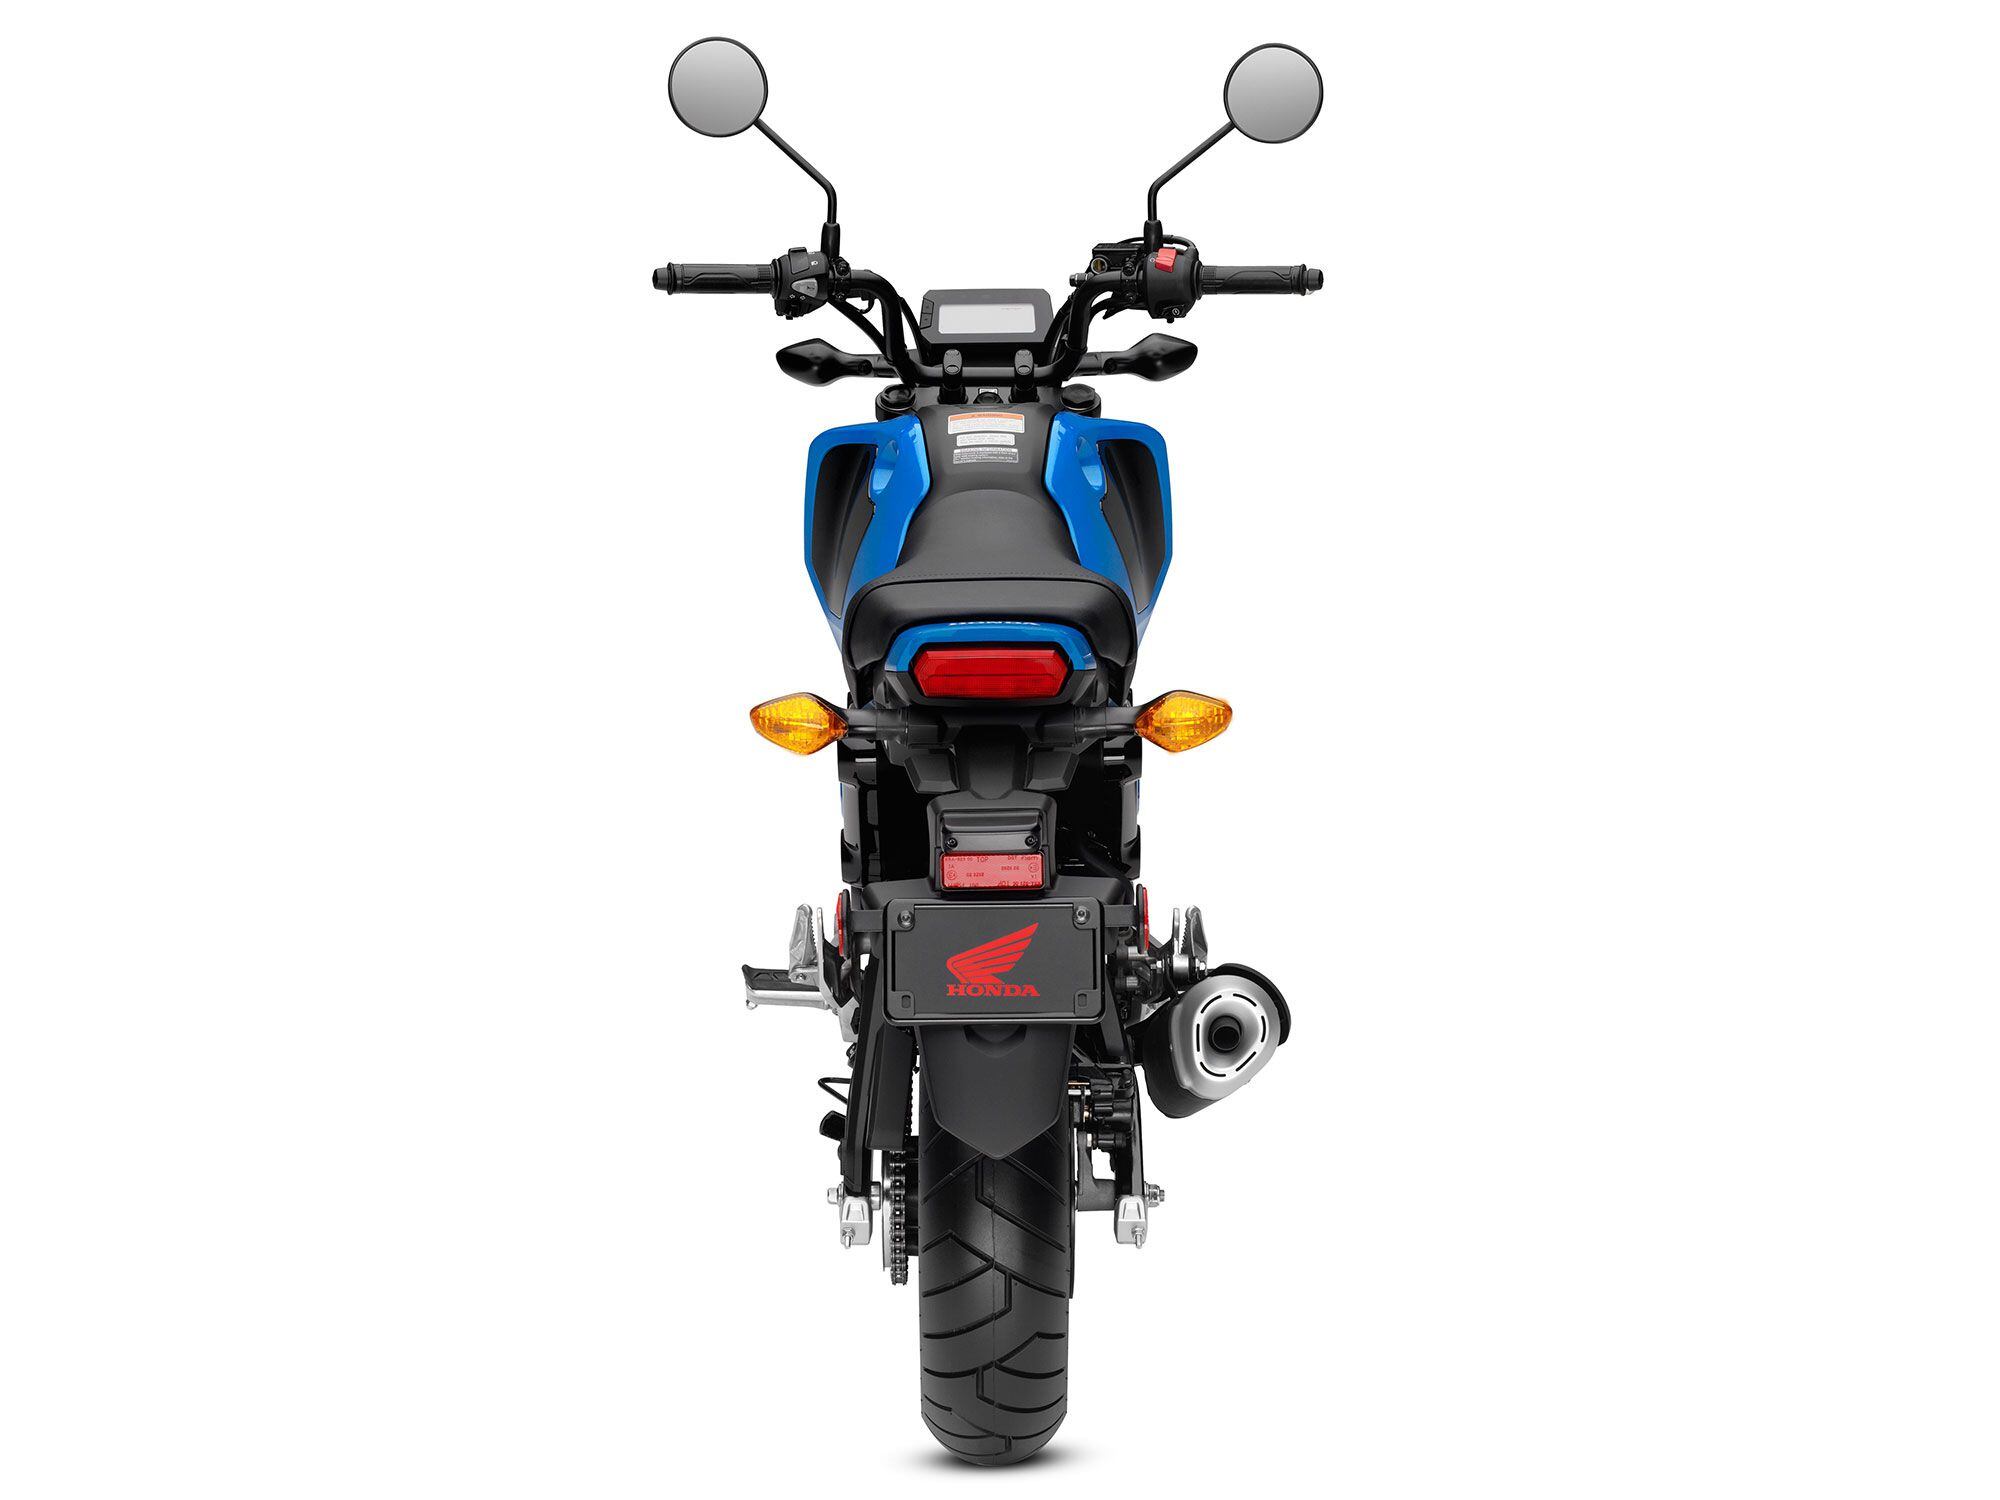 The Grom ABS now uses an IMU (inertial measurement unit) for better front-to-rear distribution of braking power.